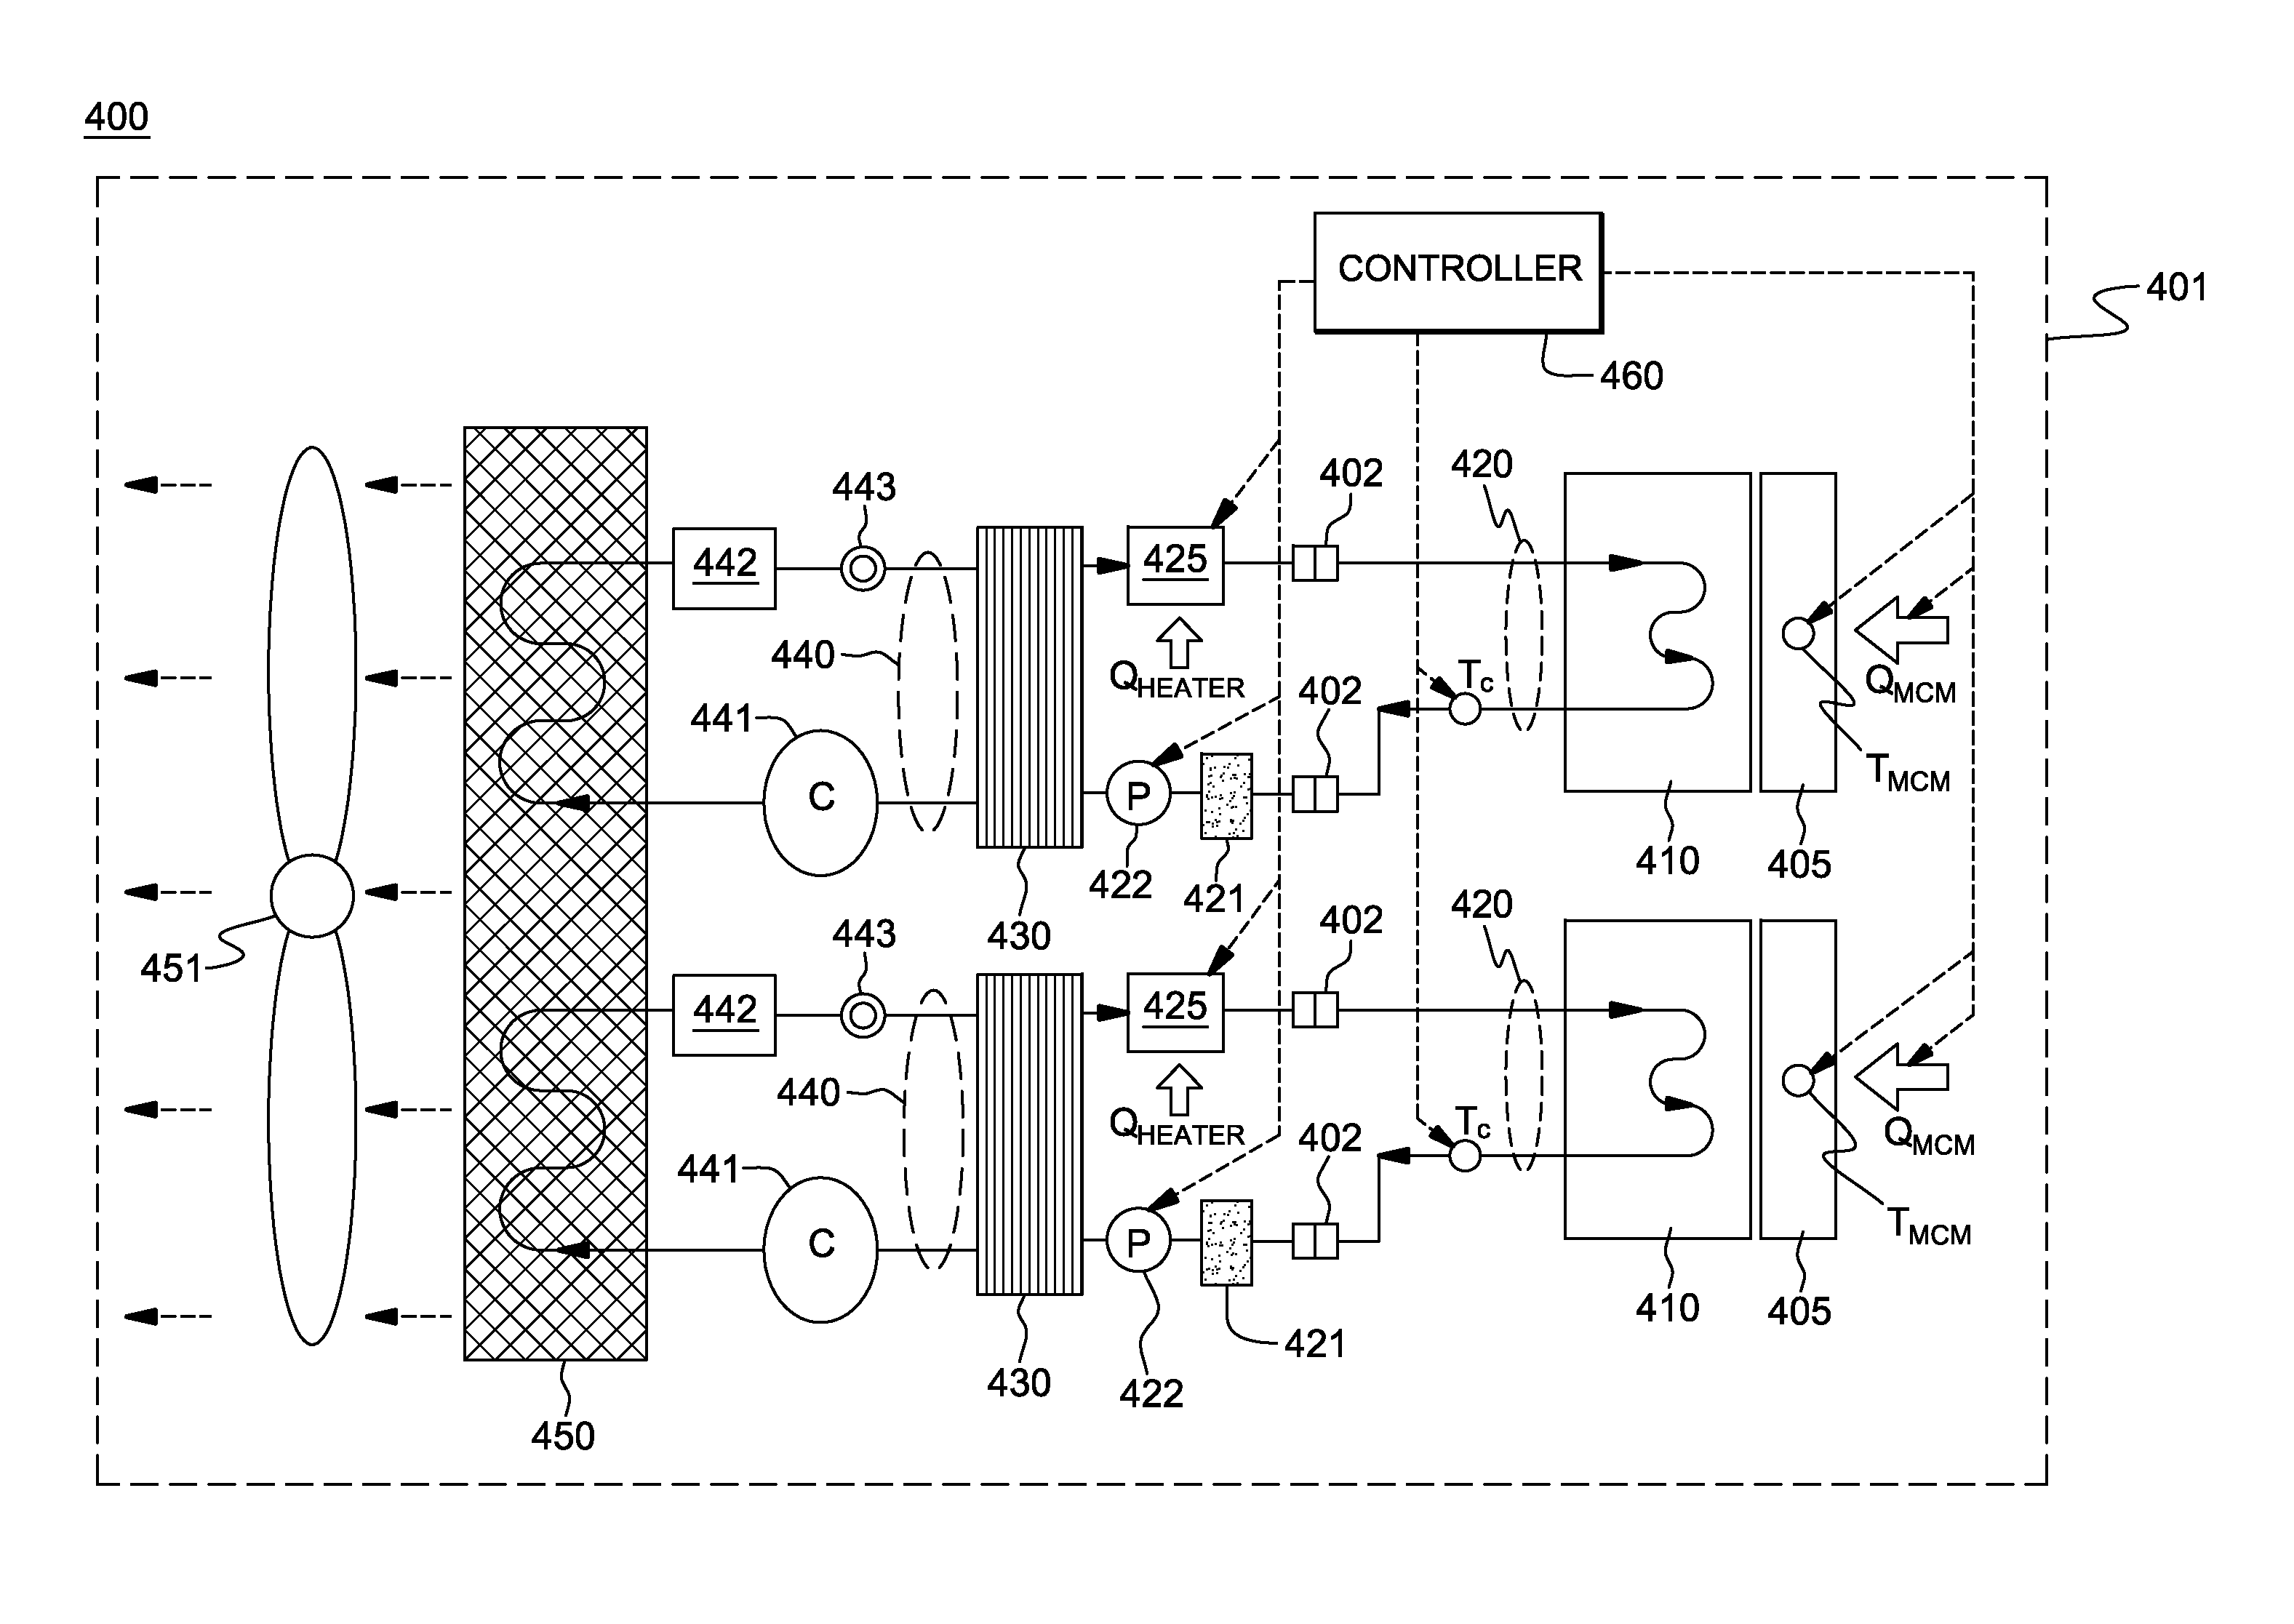 Coolant-buffered, vapor-compression refrigeration with thermal storage and compressor cycling